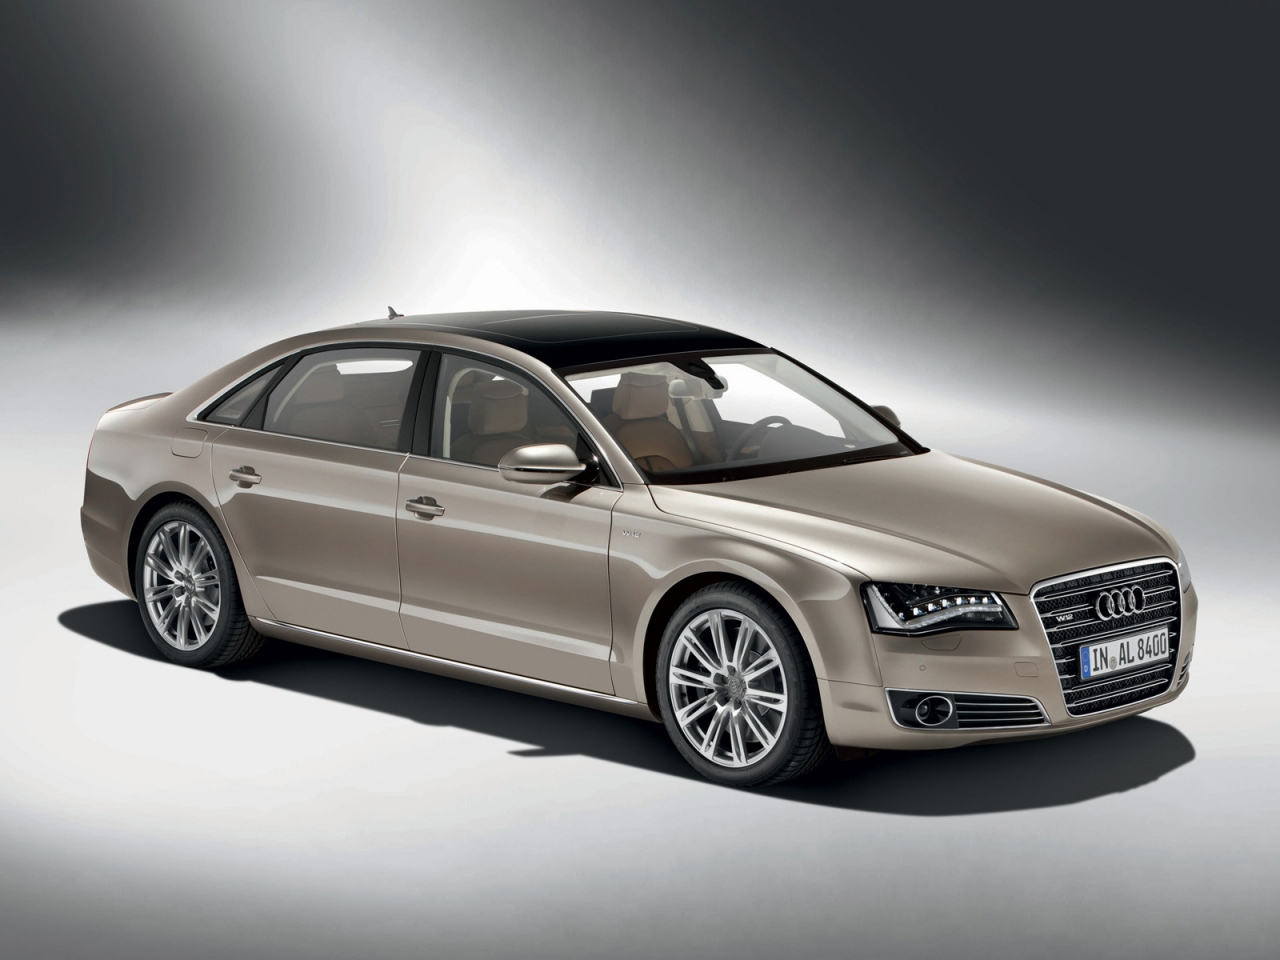 Audi A8 W12 2011 for 1280 x 960 resolution